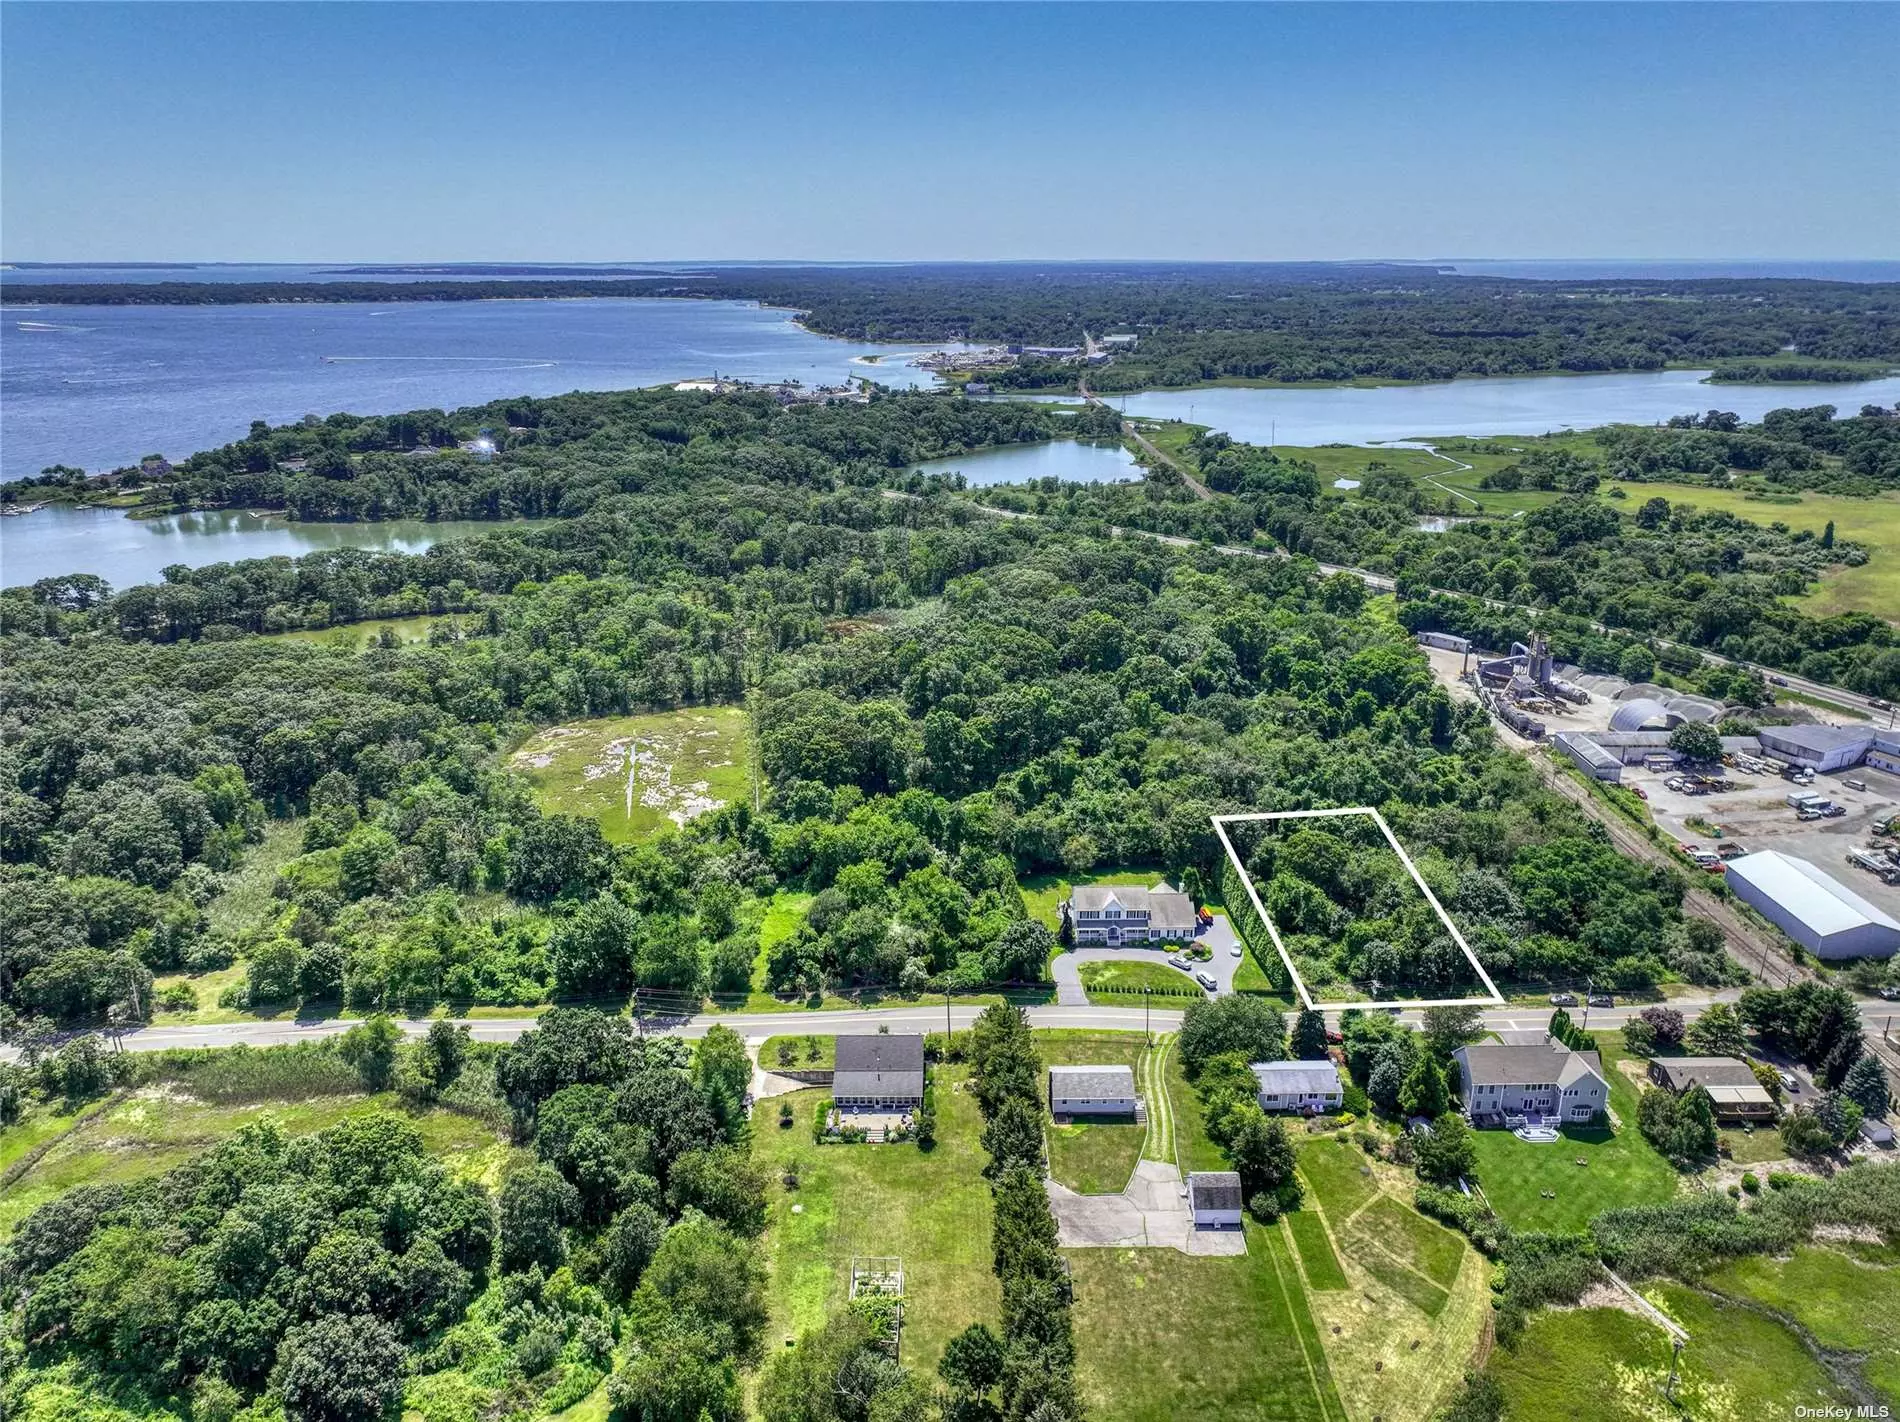 Love the beach ? Build your dream home on this beautiful land. Greenport is a pedestrian friendly village filled with activities and opportunities like a deep-water marina, fishing excursions, Shelter Island Ferry, restaurants, shopping, movie theatre, Mitchell Park, carousel, galleries, golf course, and sound & bay beaches. Build your dream home in this beautiful community.